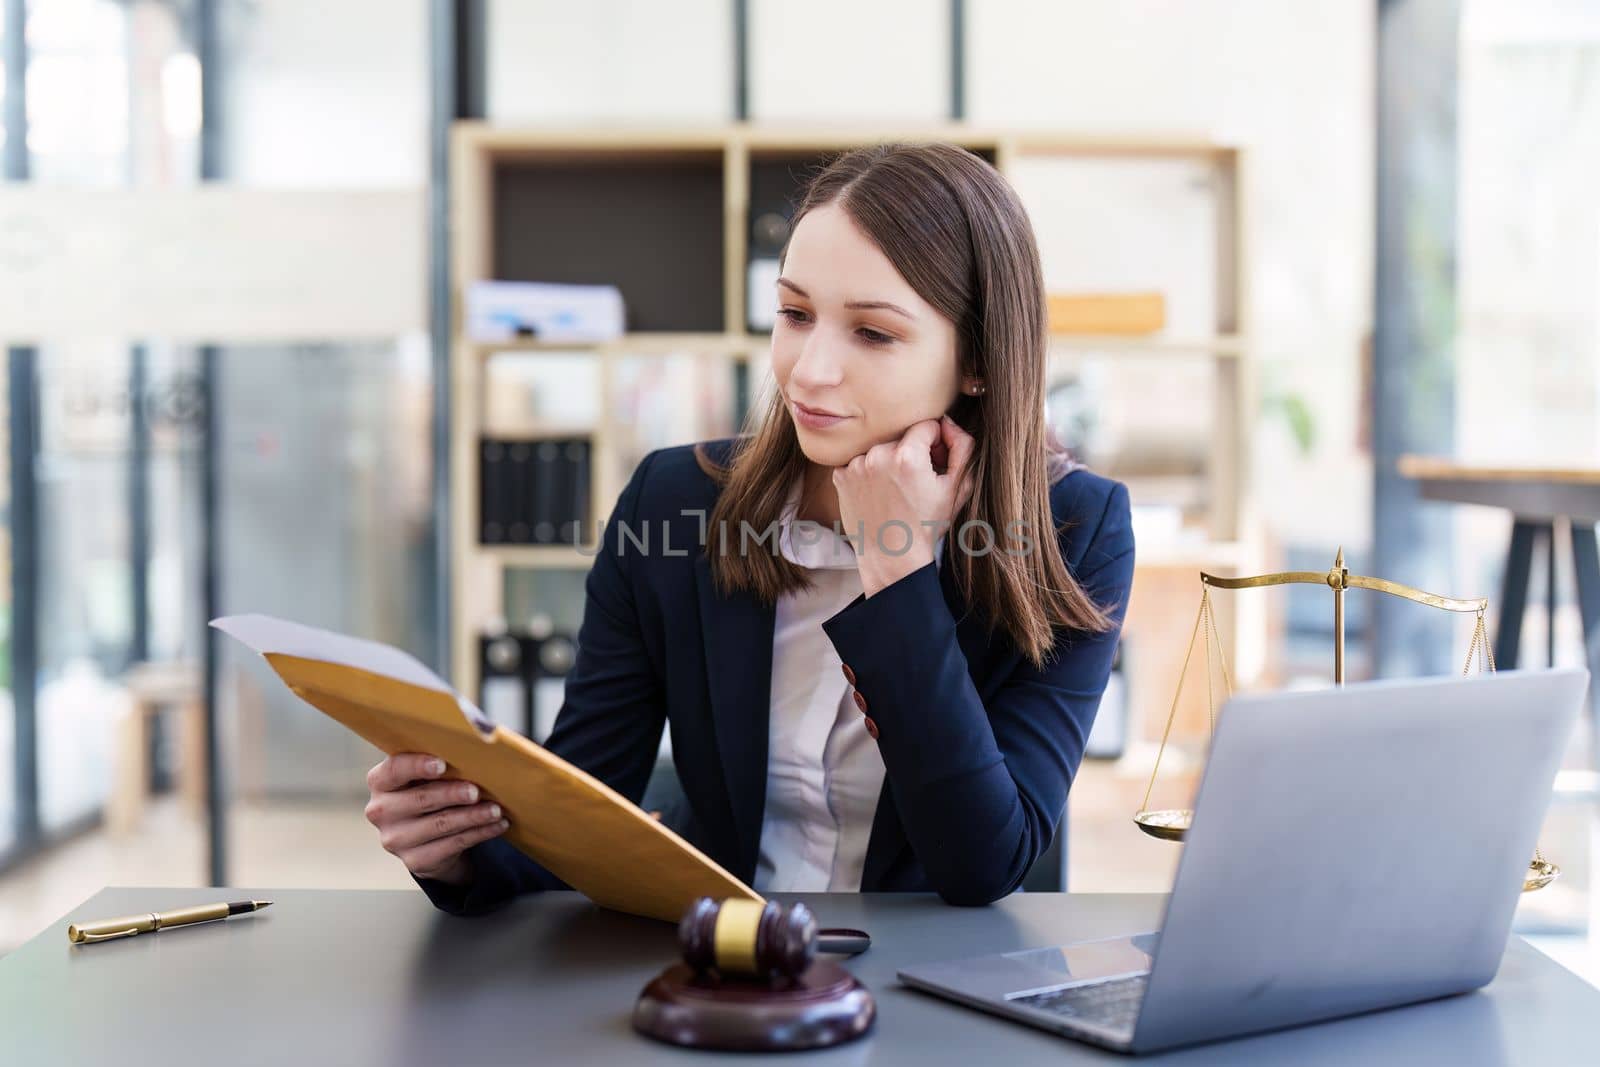 Business Lawyer consulting online on laptop while working at office..